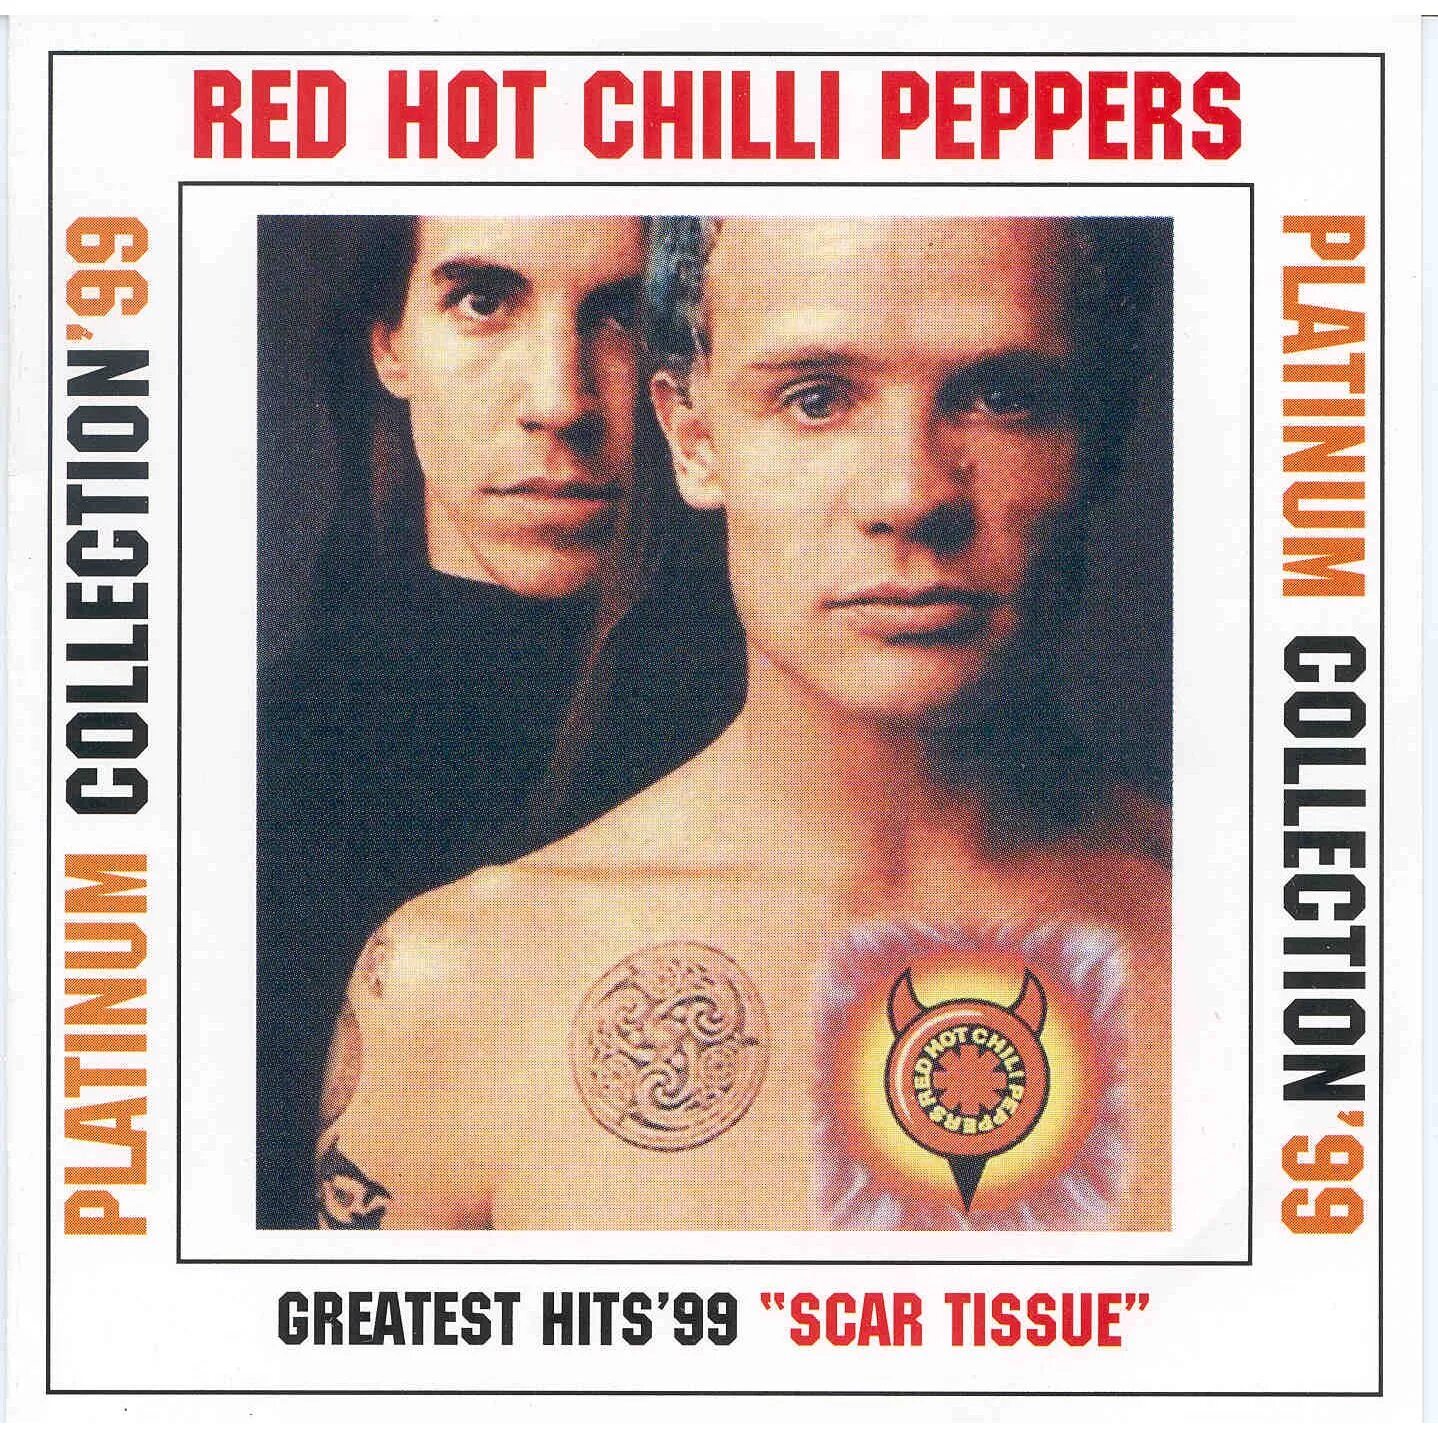 Red hot chili peppers necessities. Ред хот Чили Пепперс. Red hot Chili Peppers обложка. Red hot Chili Peppers альбомы. RHCP обложки альбомов.